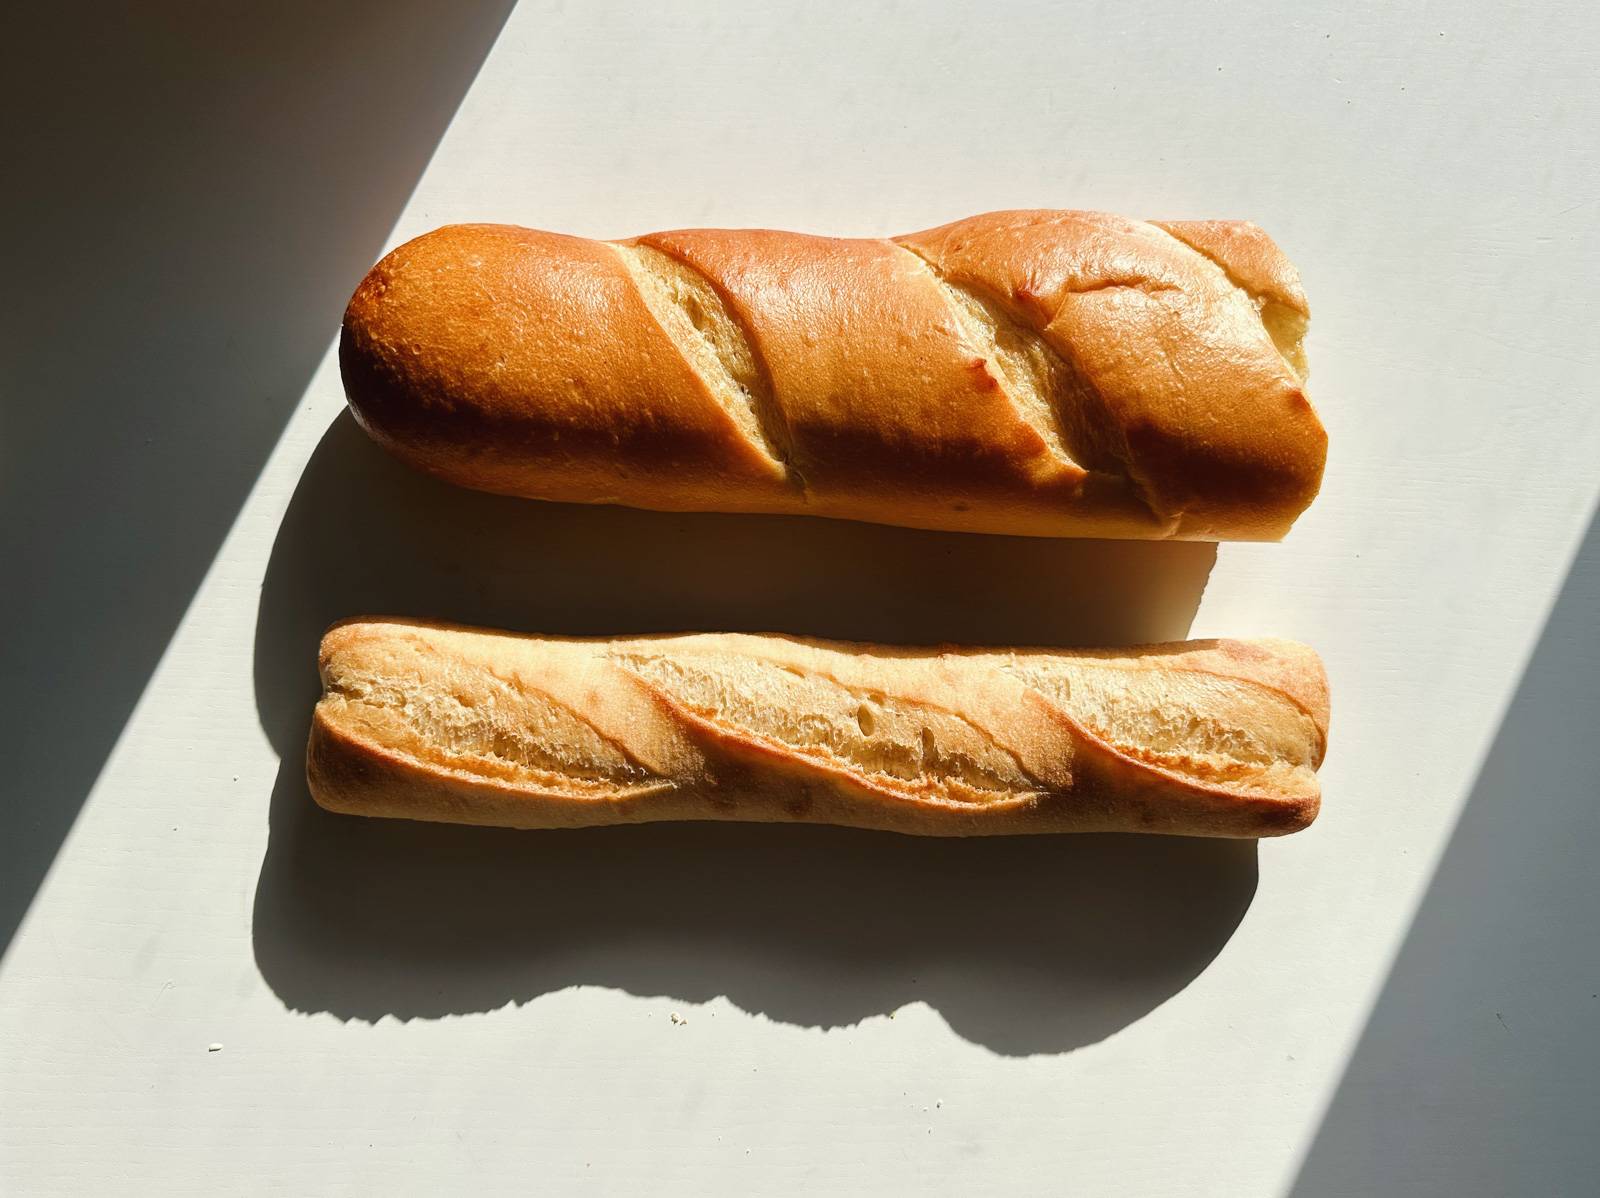 Two loaves of bread - a baguette and French bread.